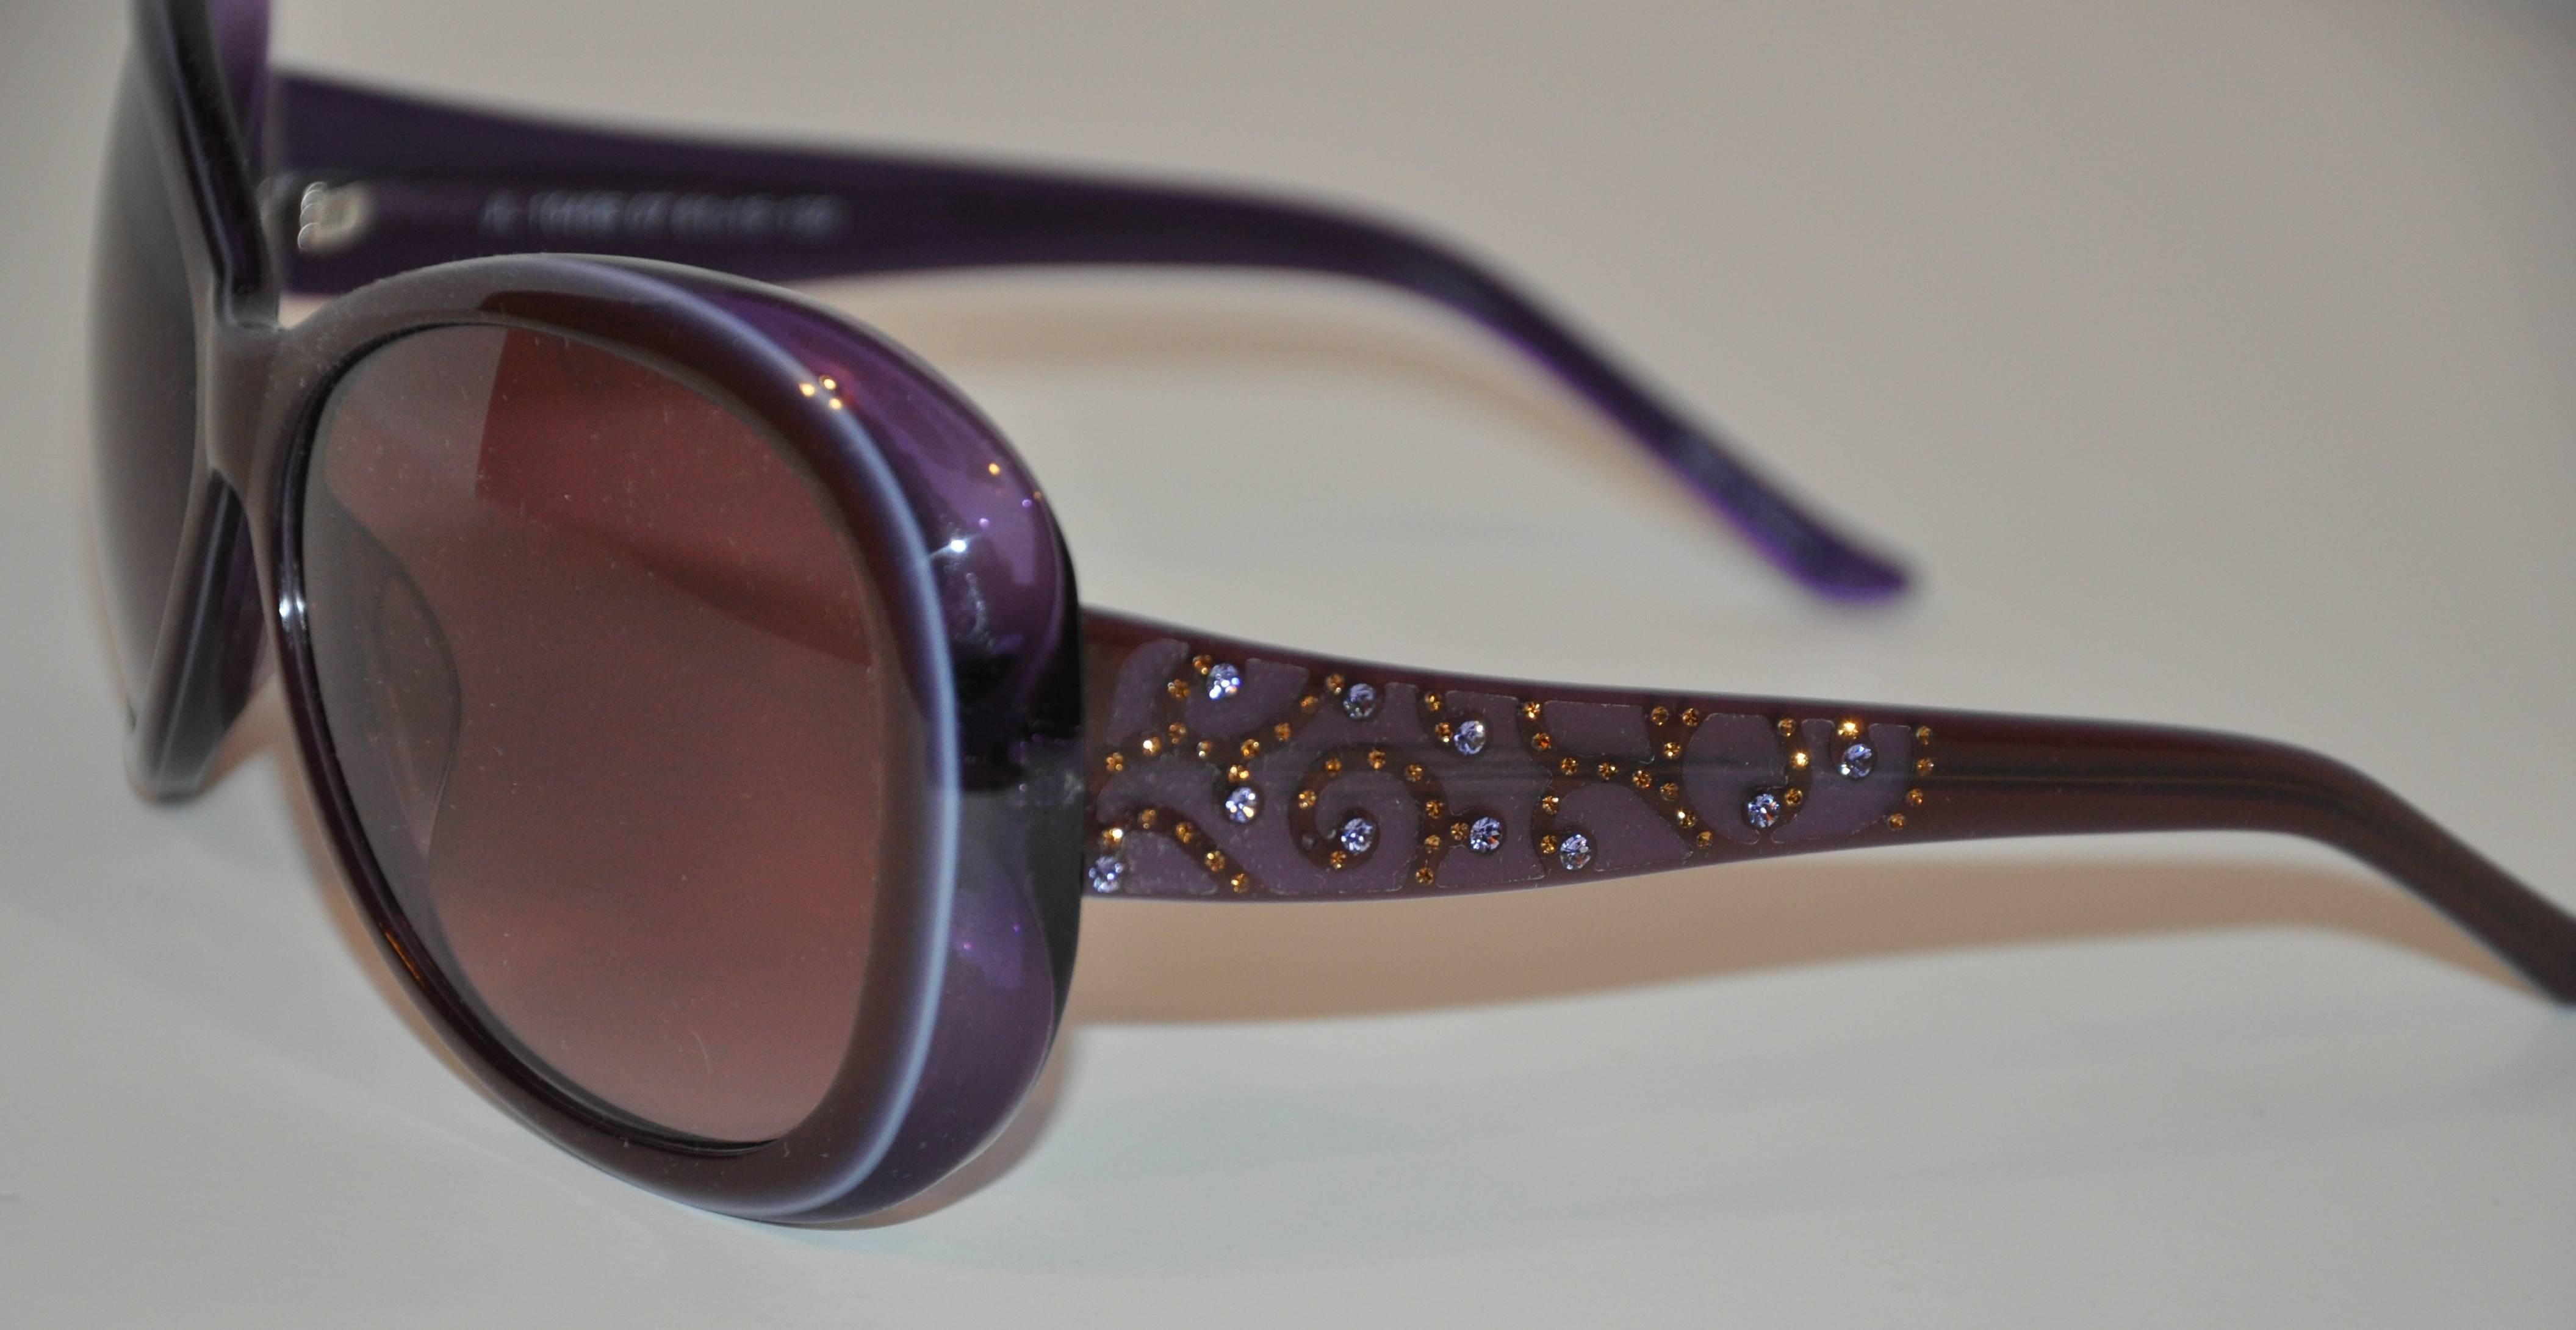 Judith Leiber wonderfully detailed huge sunglasses with 